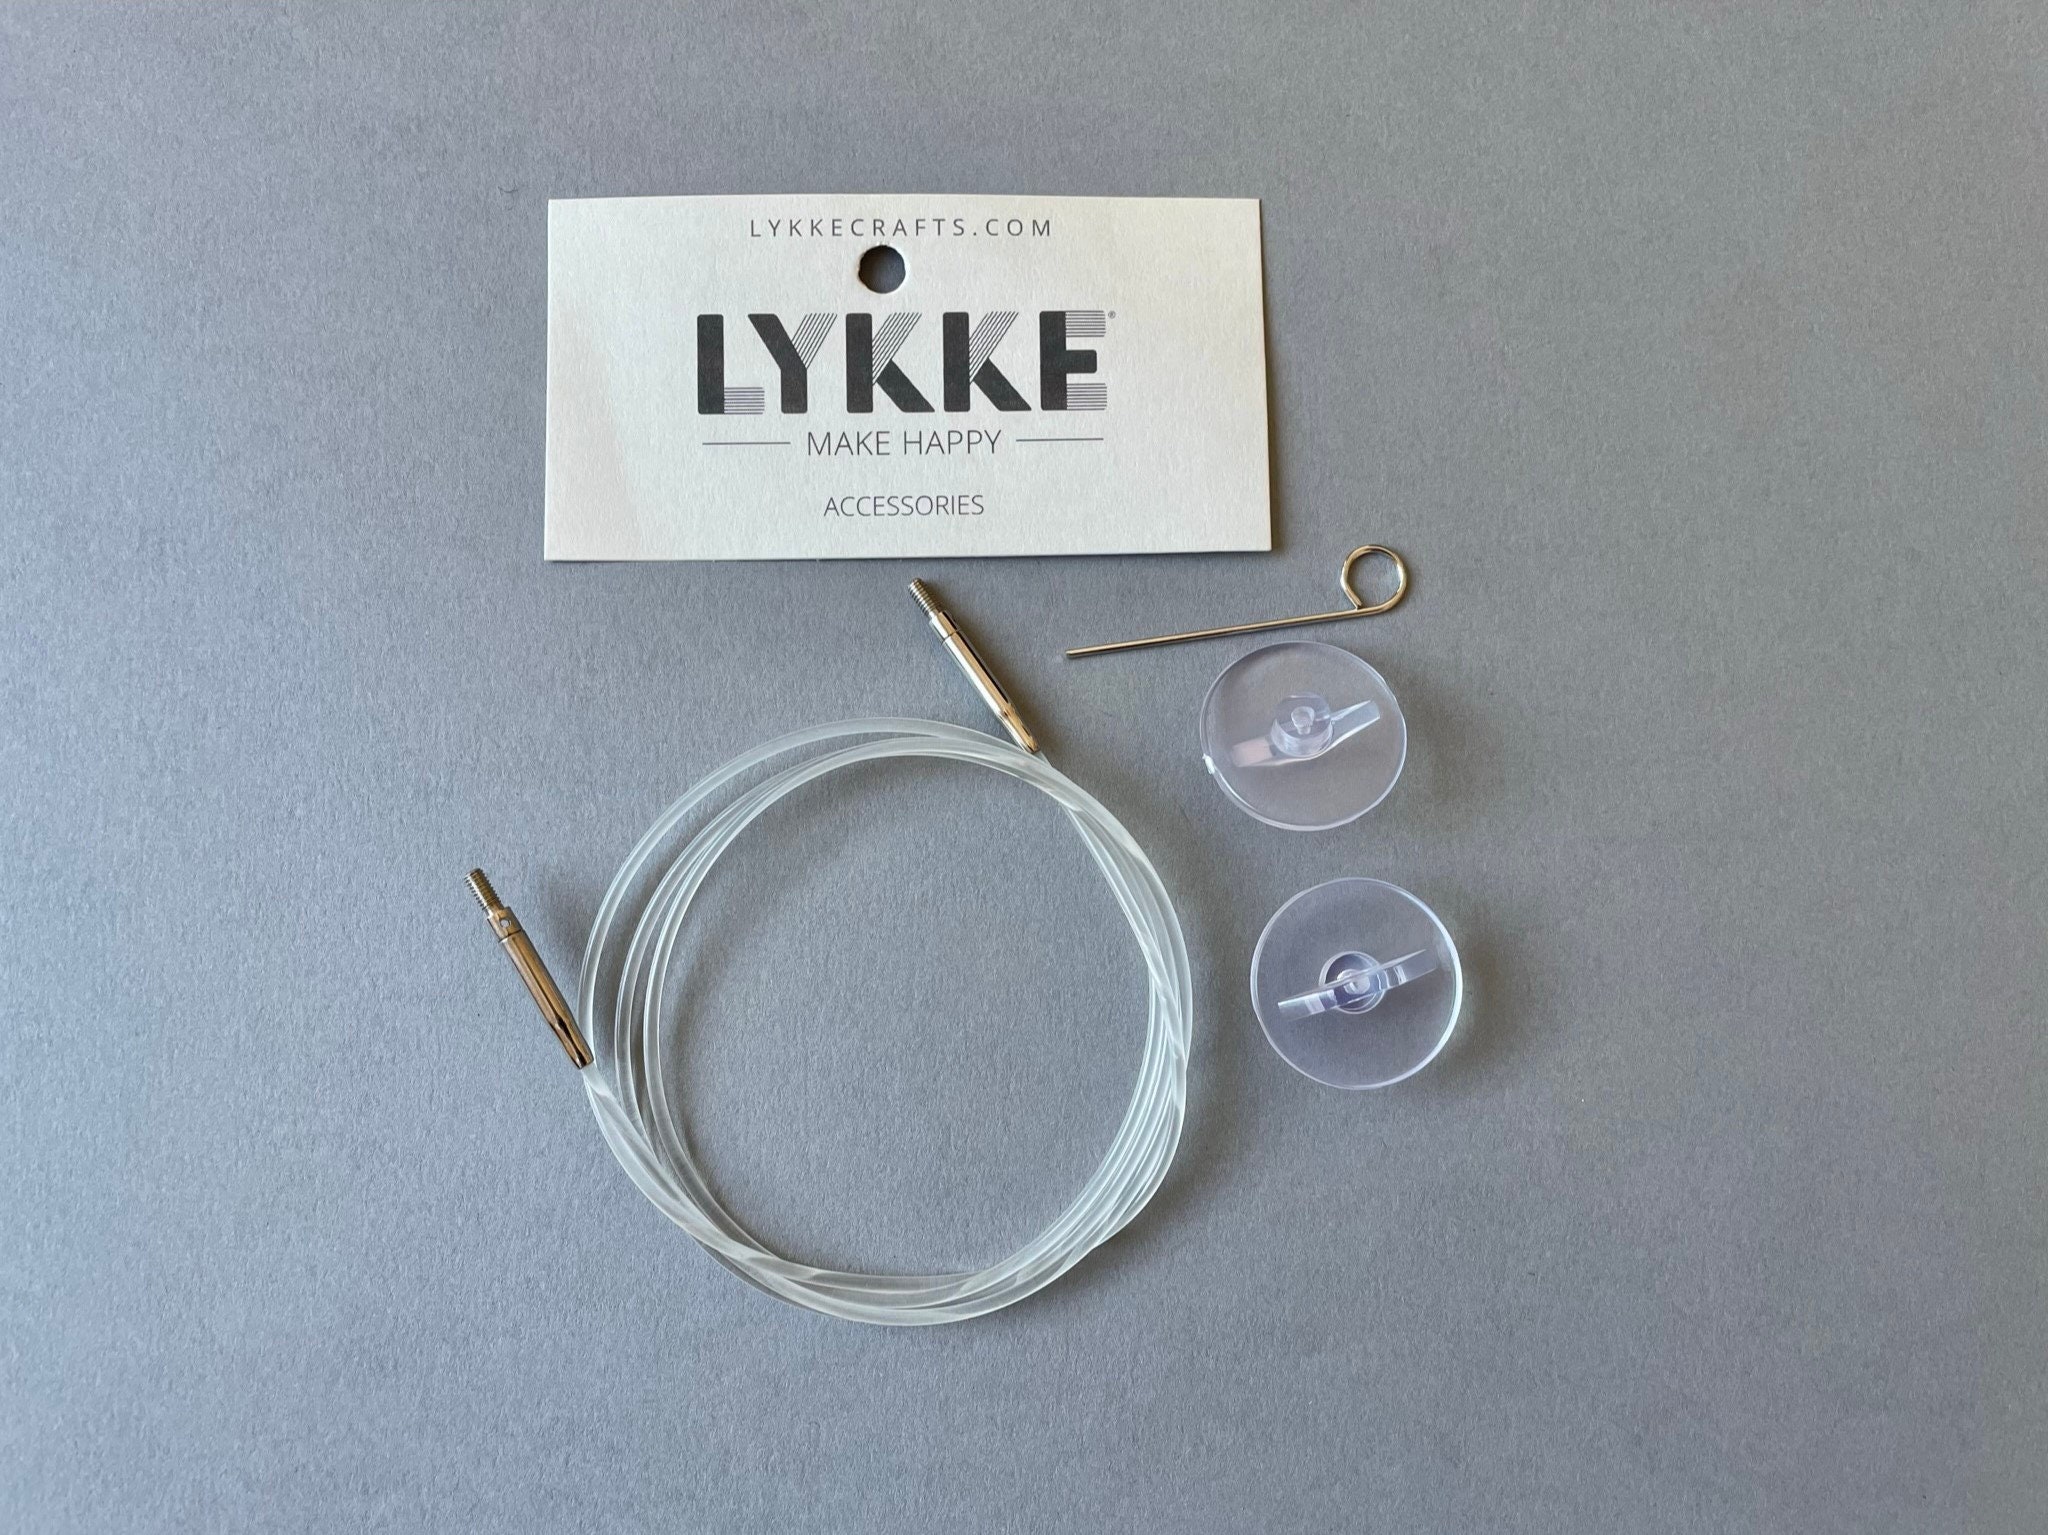 LYKKE - Blue Swivel Cords to connect Interchangeable Knitting Needles